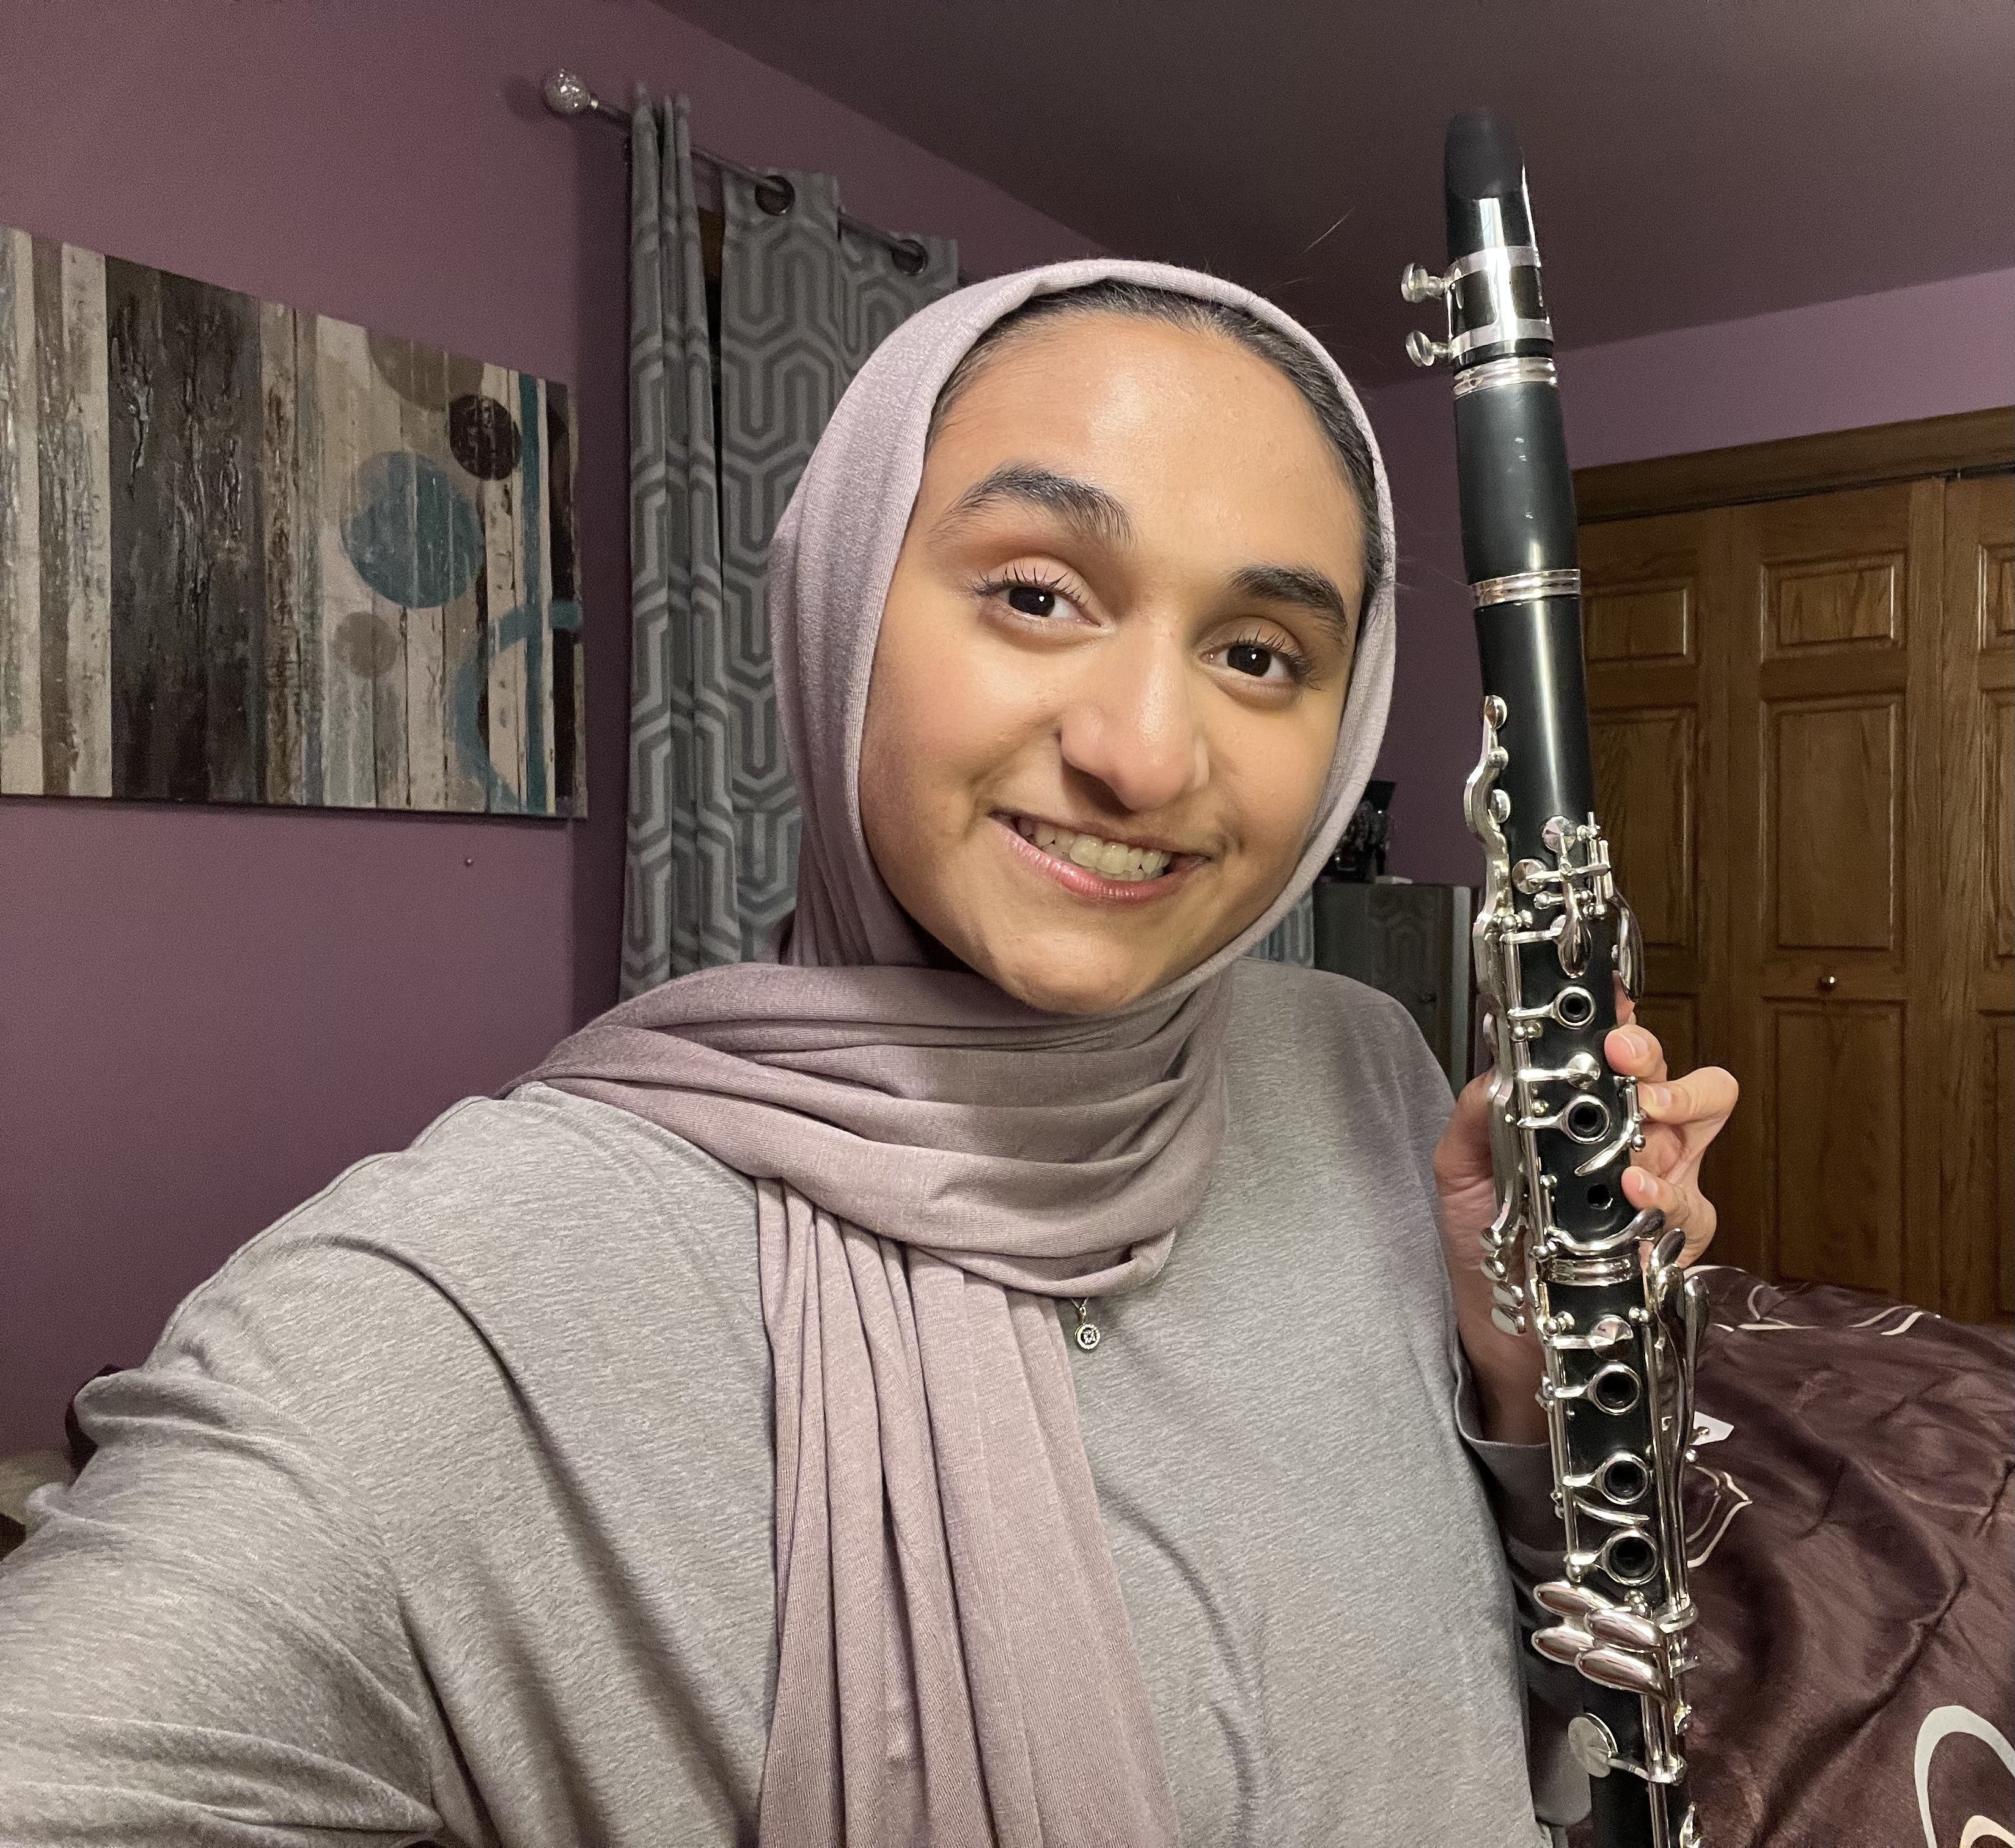  Emaan Dawood has played the clarinet for 11 years and was part of her college's pep band. 